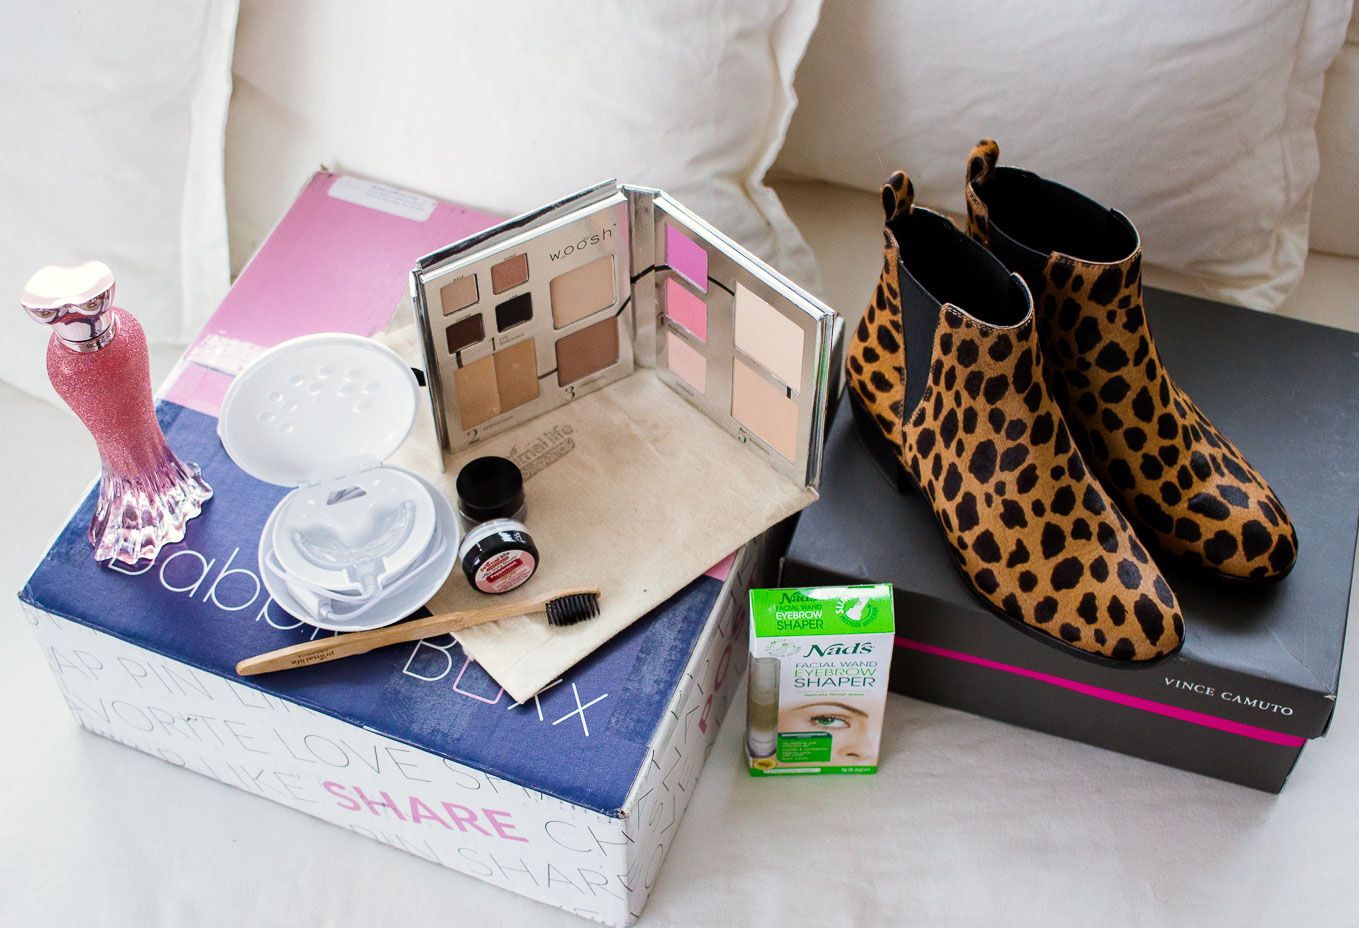 Lifestyle blogger Roxanne of Glass of Glam's review of the Babbleboxx Party Perfect Box